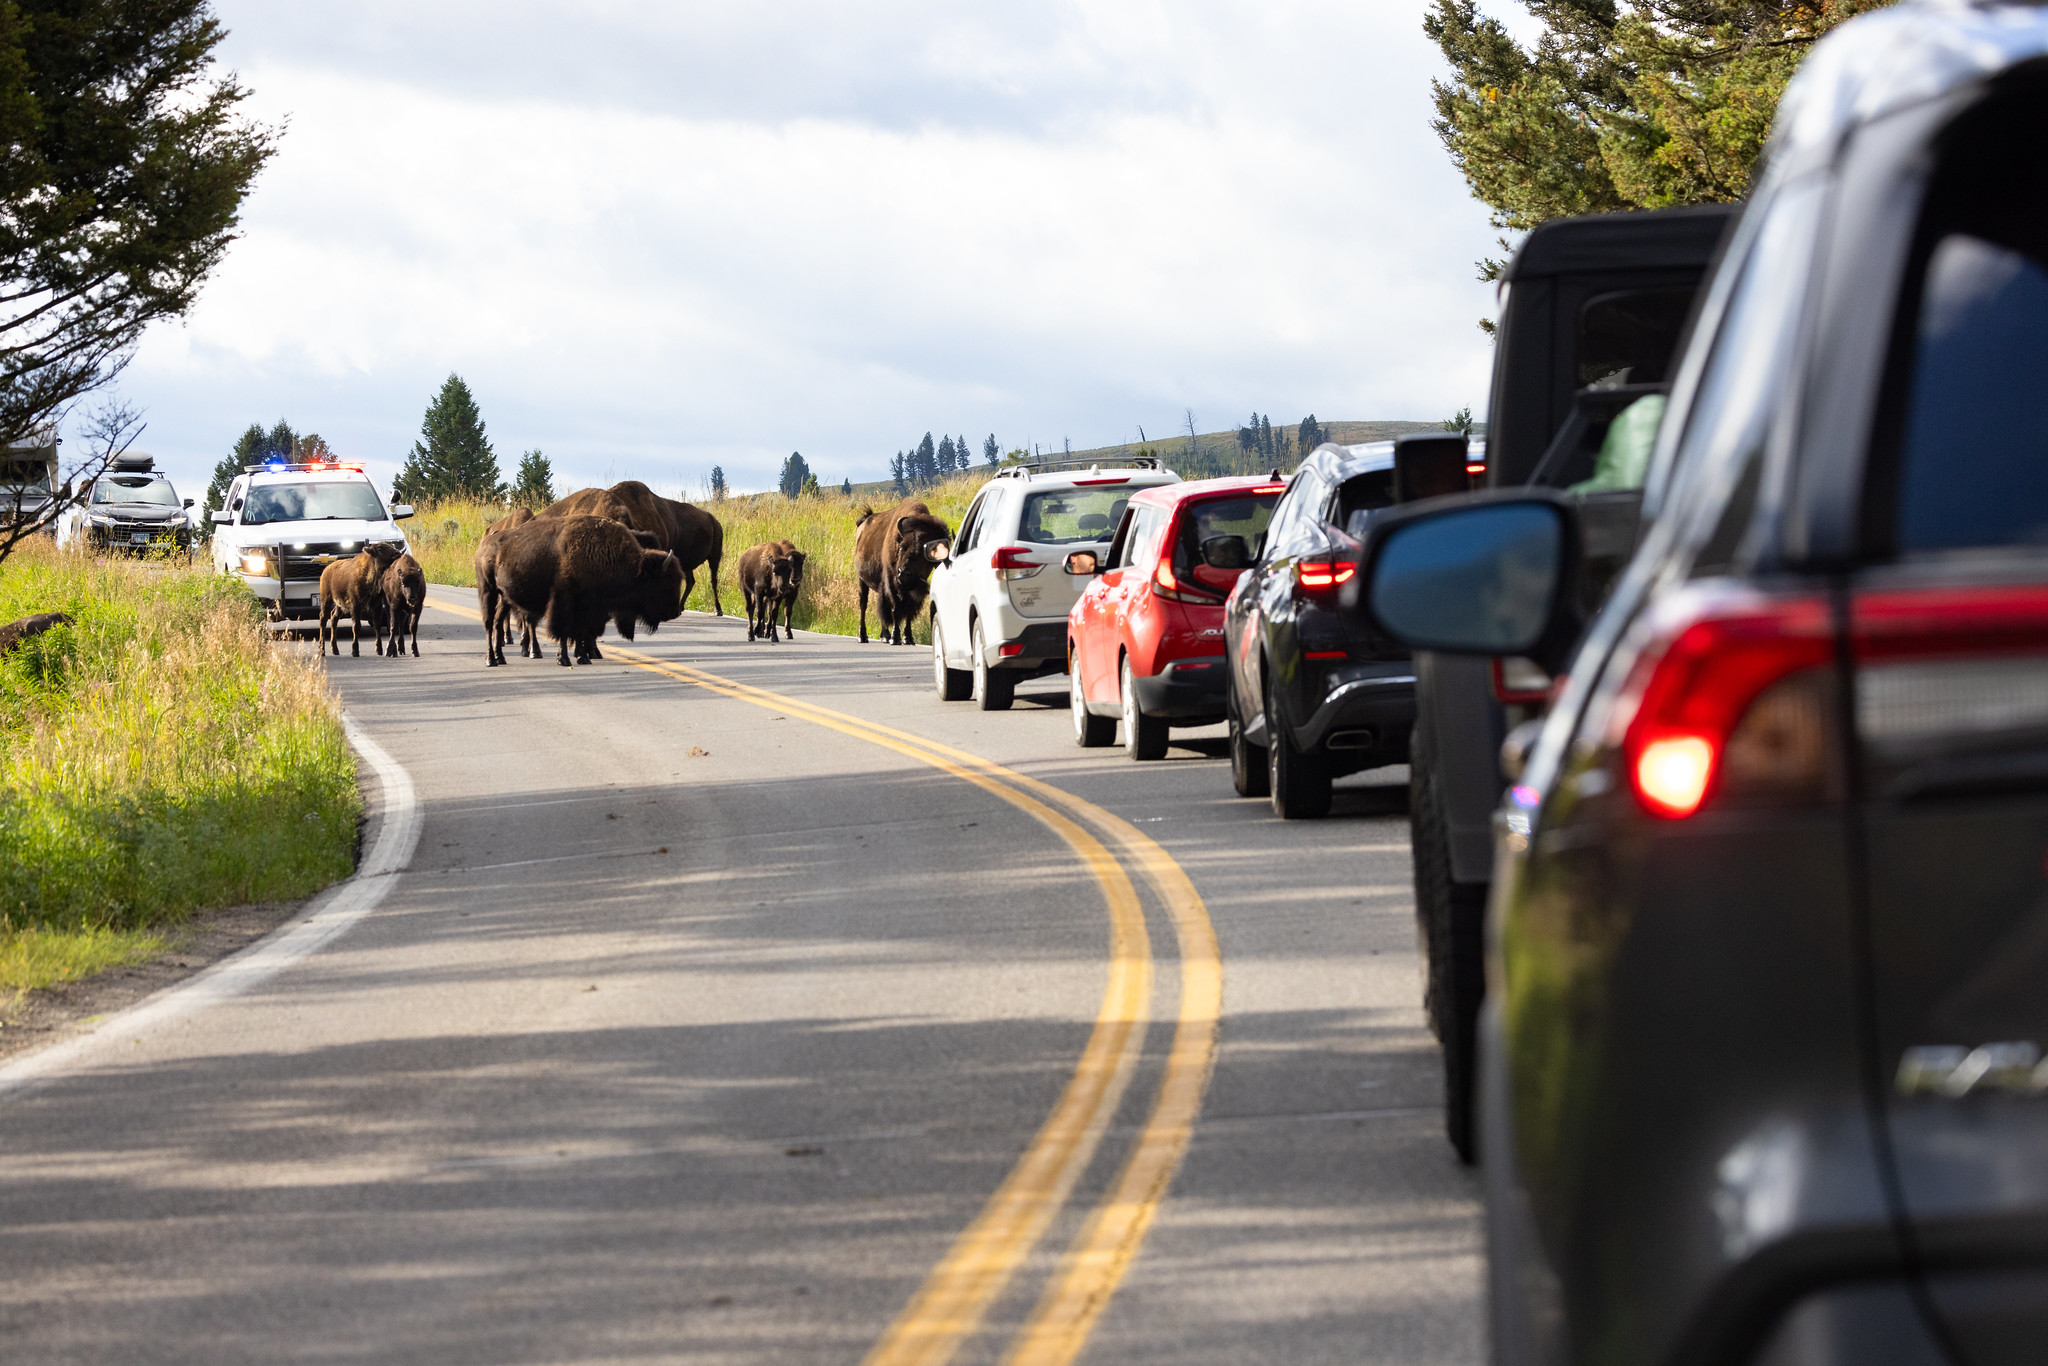 Bison on the road during the rut being moved by law enforcement